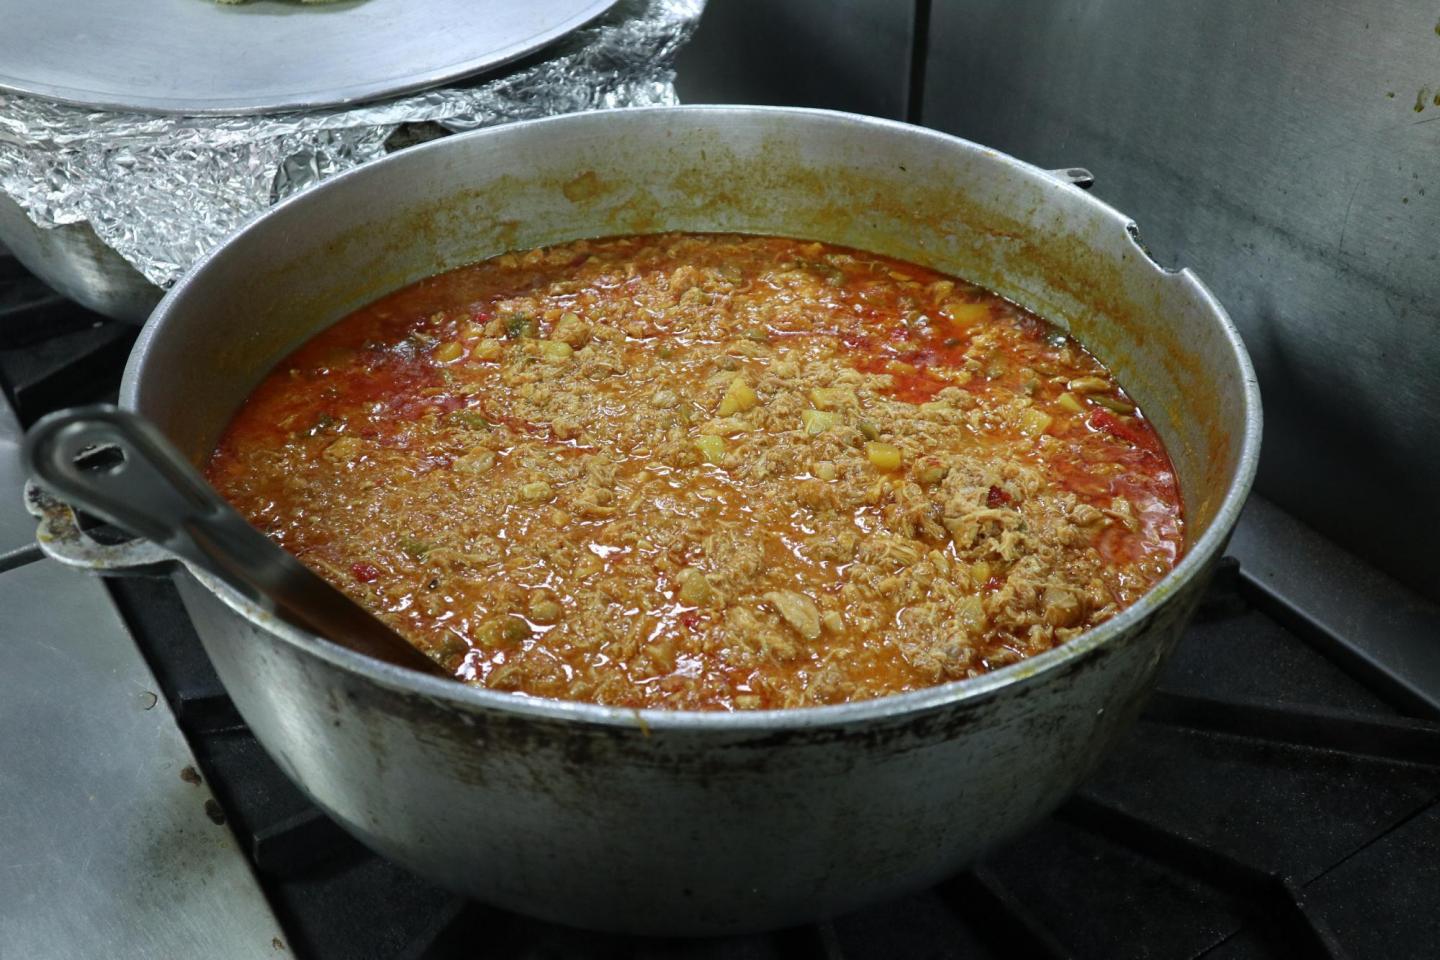 A giant pot of food cooking on a stove